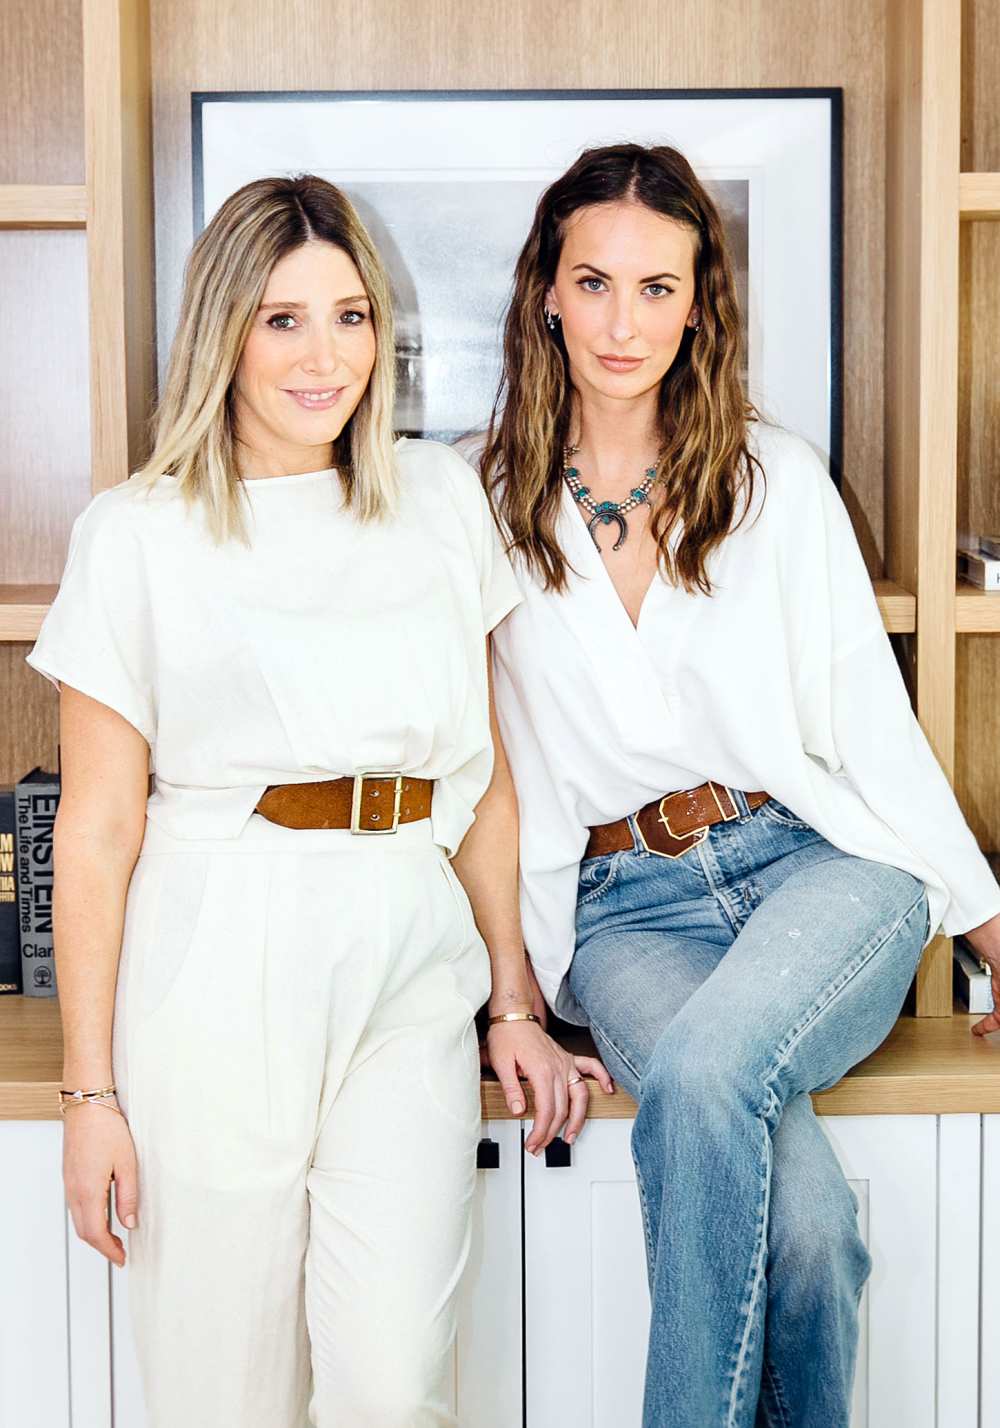 Dame Clothing Founders Alexx Jae Monkarsh and Molly Fishkin Levin